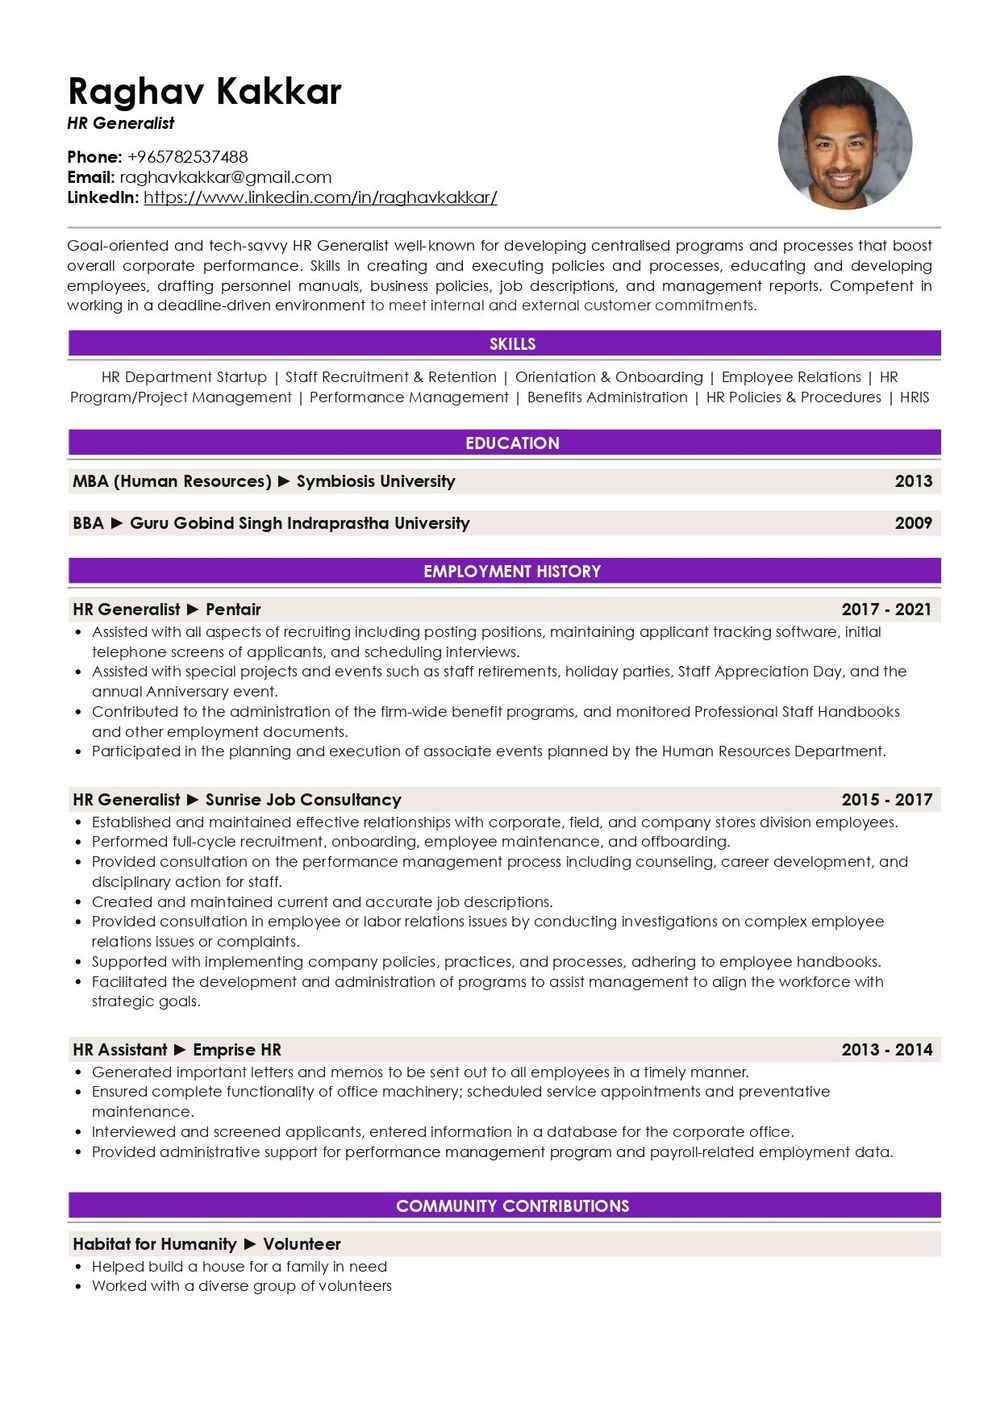 writing-a-resume-for-hr-jobs-5-examples